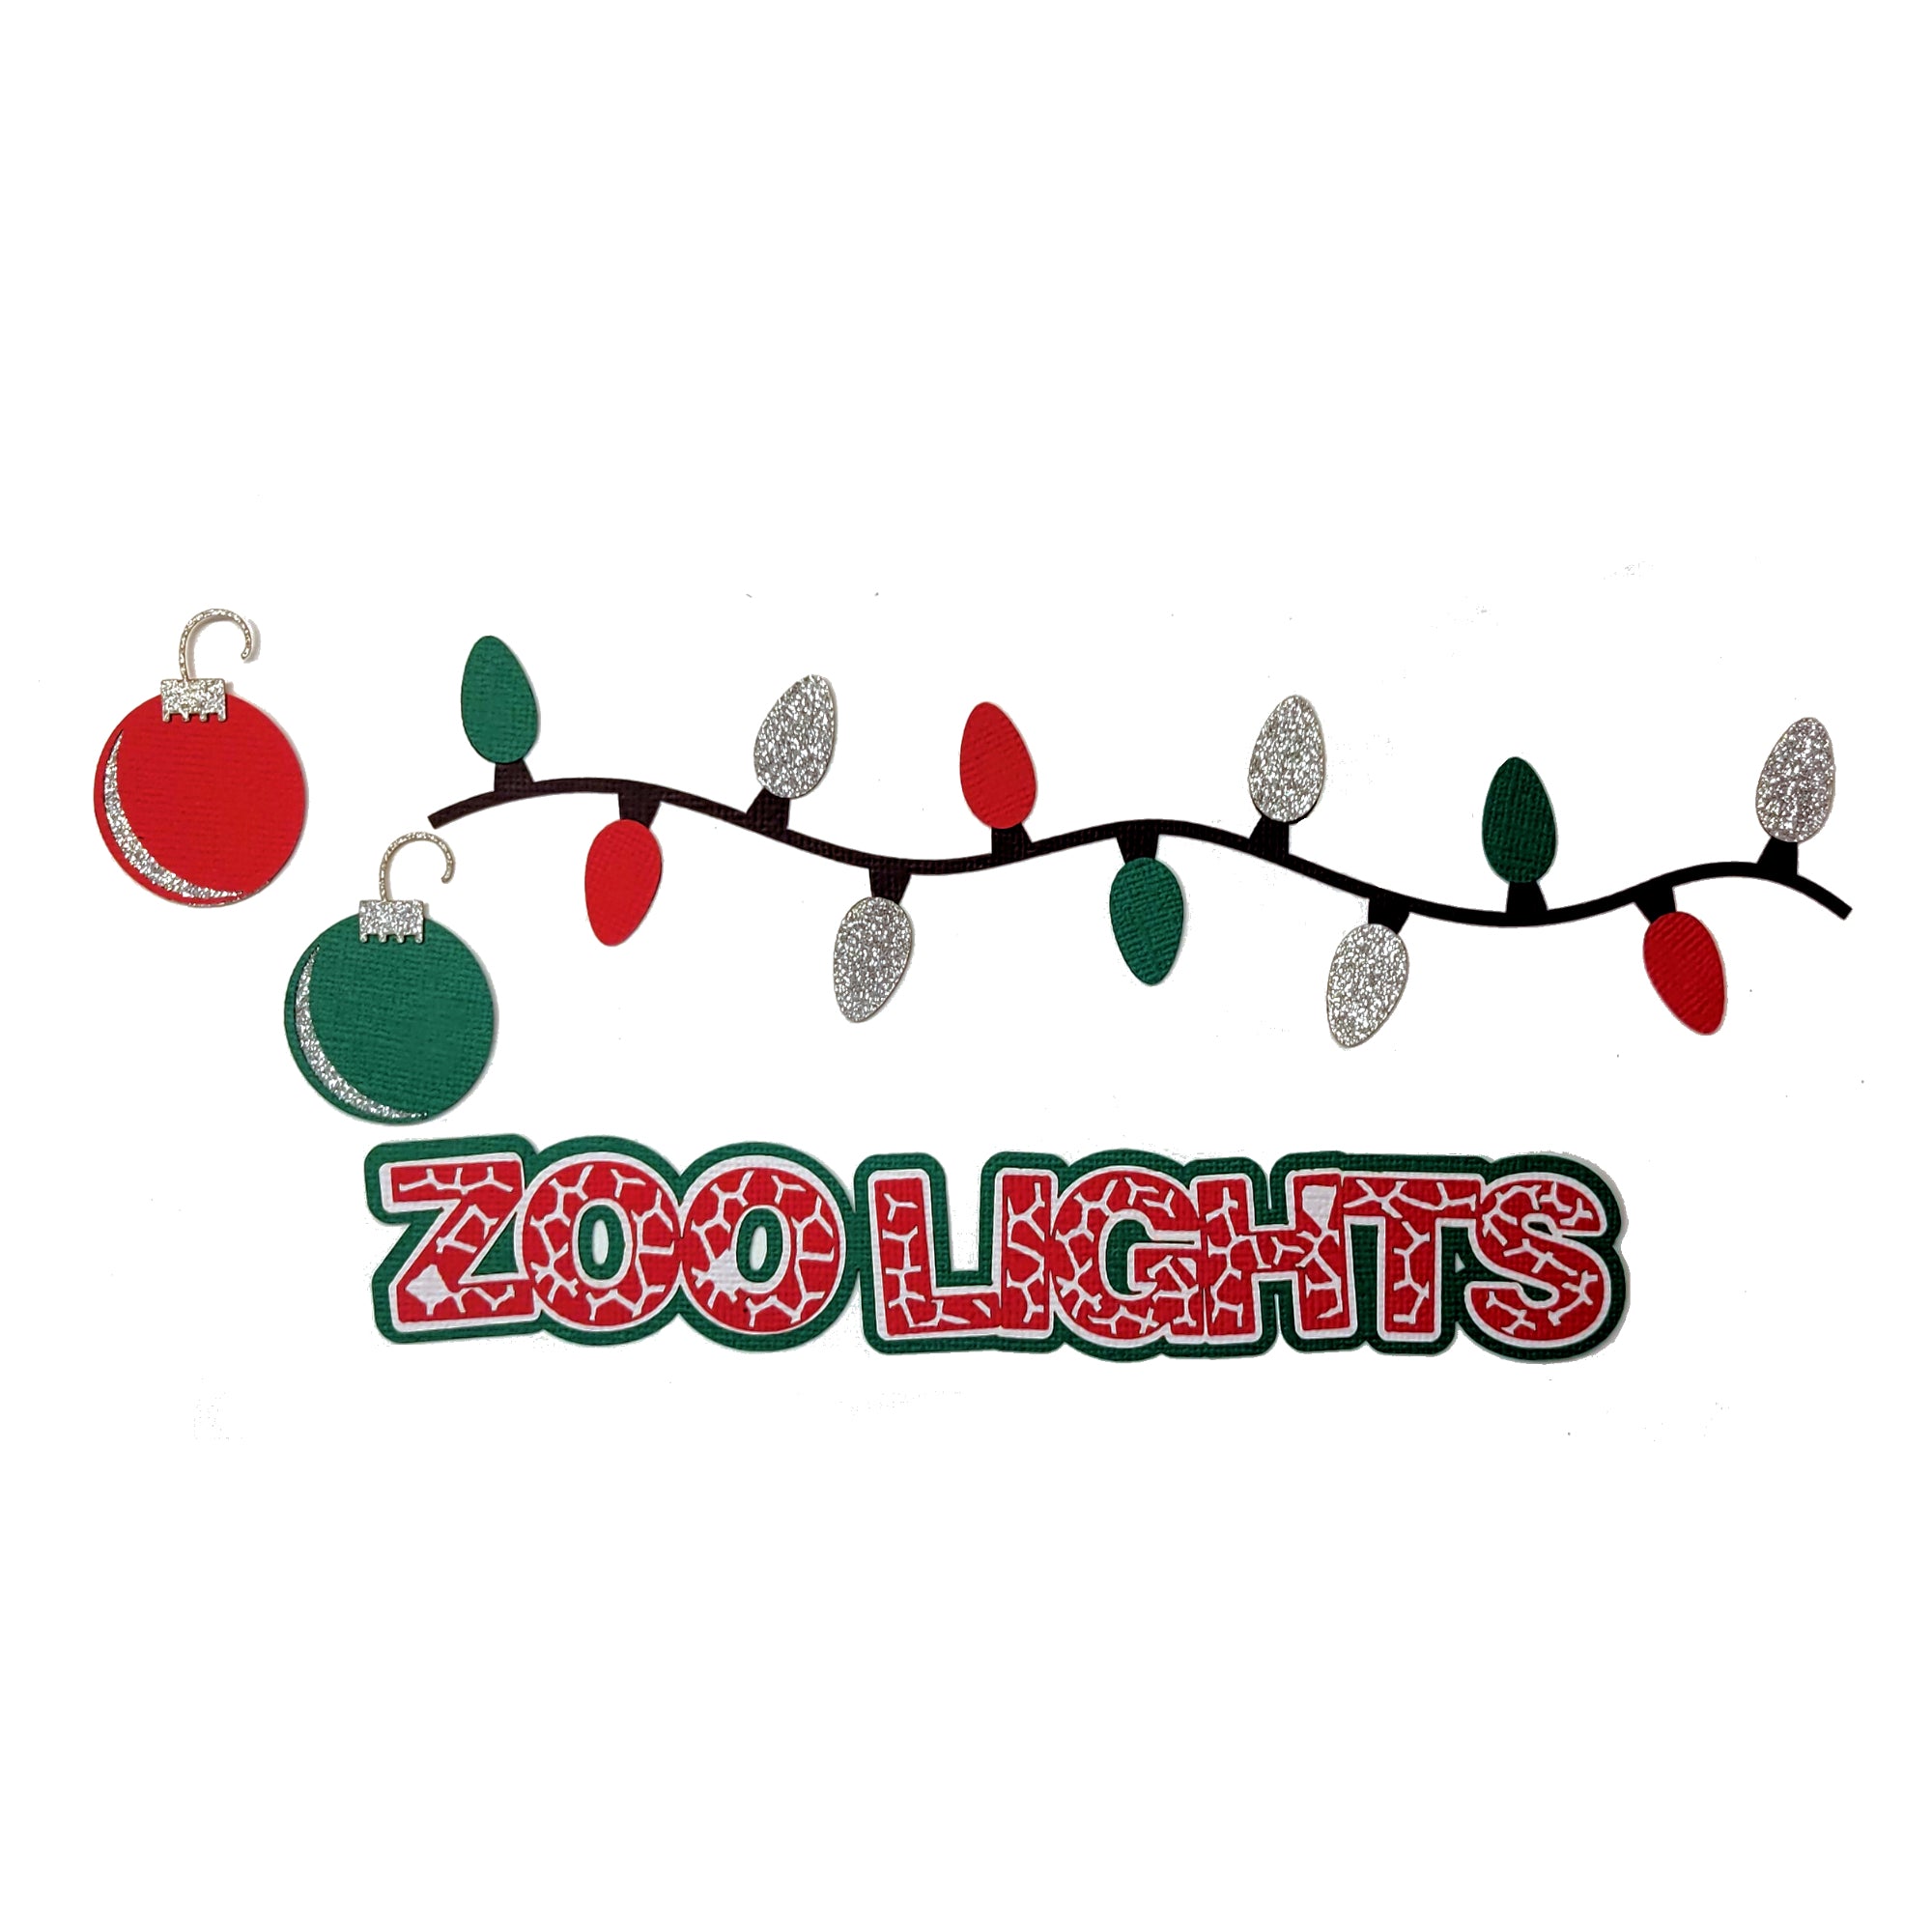 Zoo Lights Title & Accessories 7.5 x 1.25 Fully-Assembled Laser Cut Scrapbook Embellishment by SSC Laser Designs